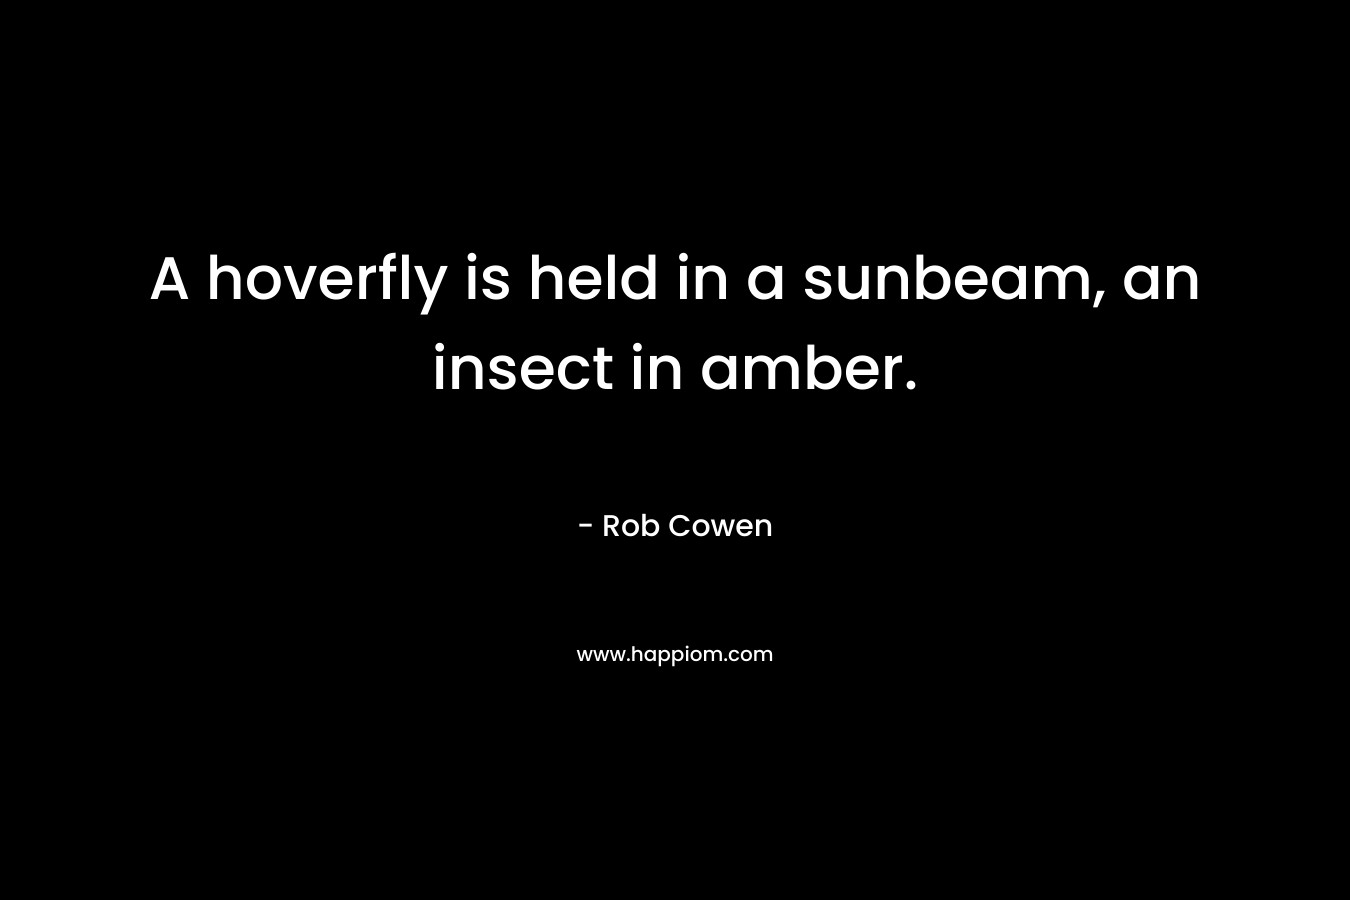 A hoverfly is held in a sunbeam, an insect in amber. – Rob Cowen